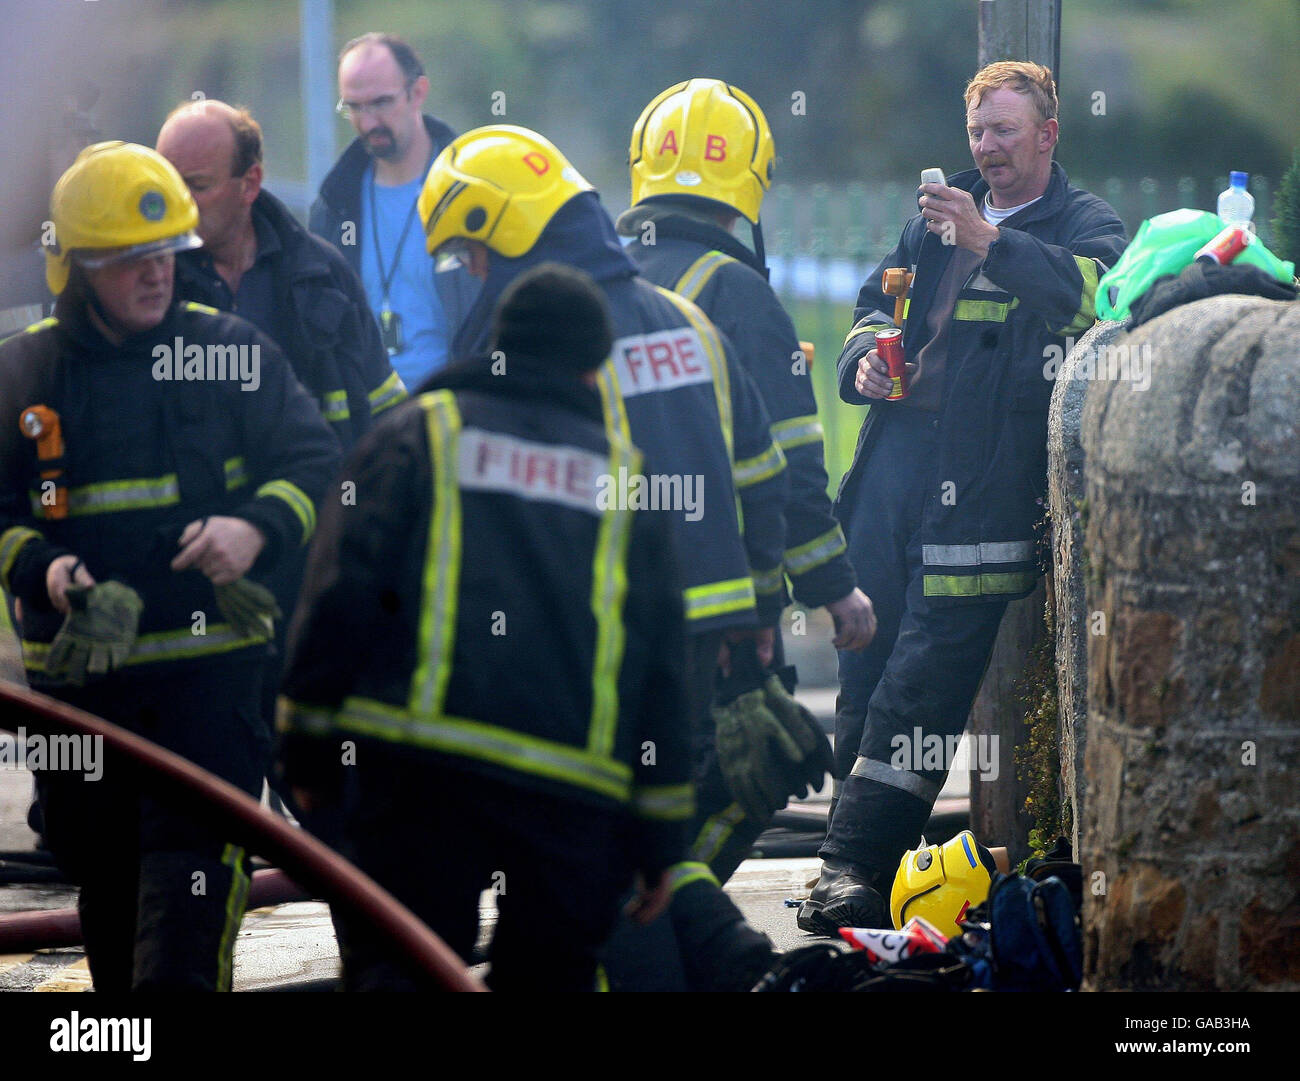 Firefighters killed in warehouse blaze. Firefighters stand at the scene of a fire in Bray, Co Wicklow were two firefighters lost their lives today. Stock Photo